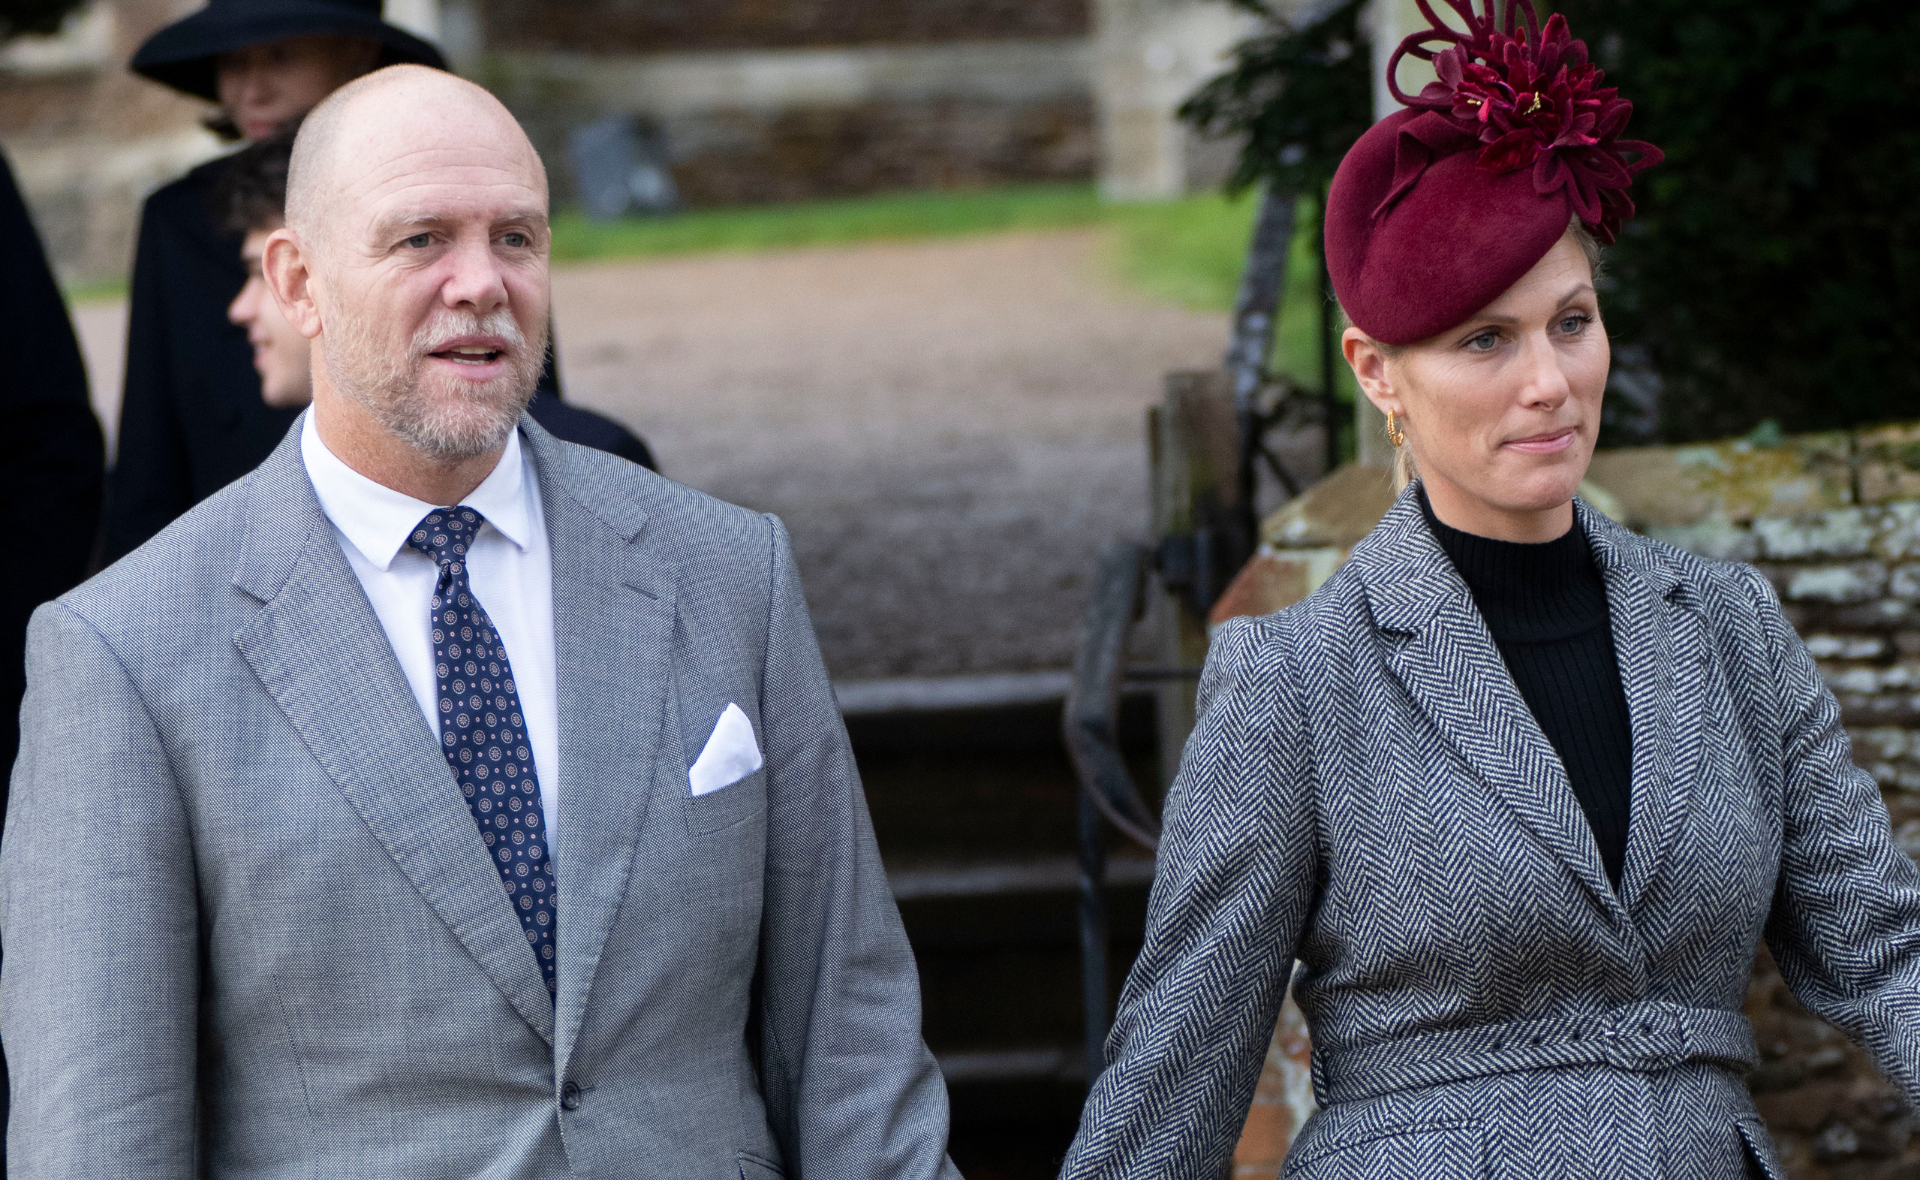 Mike Tindall makes embarrassing blunder, upsets wife Zara in the process